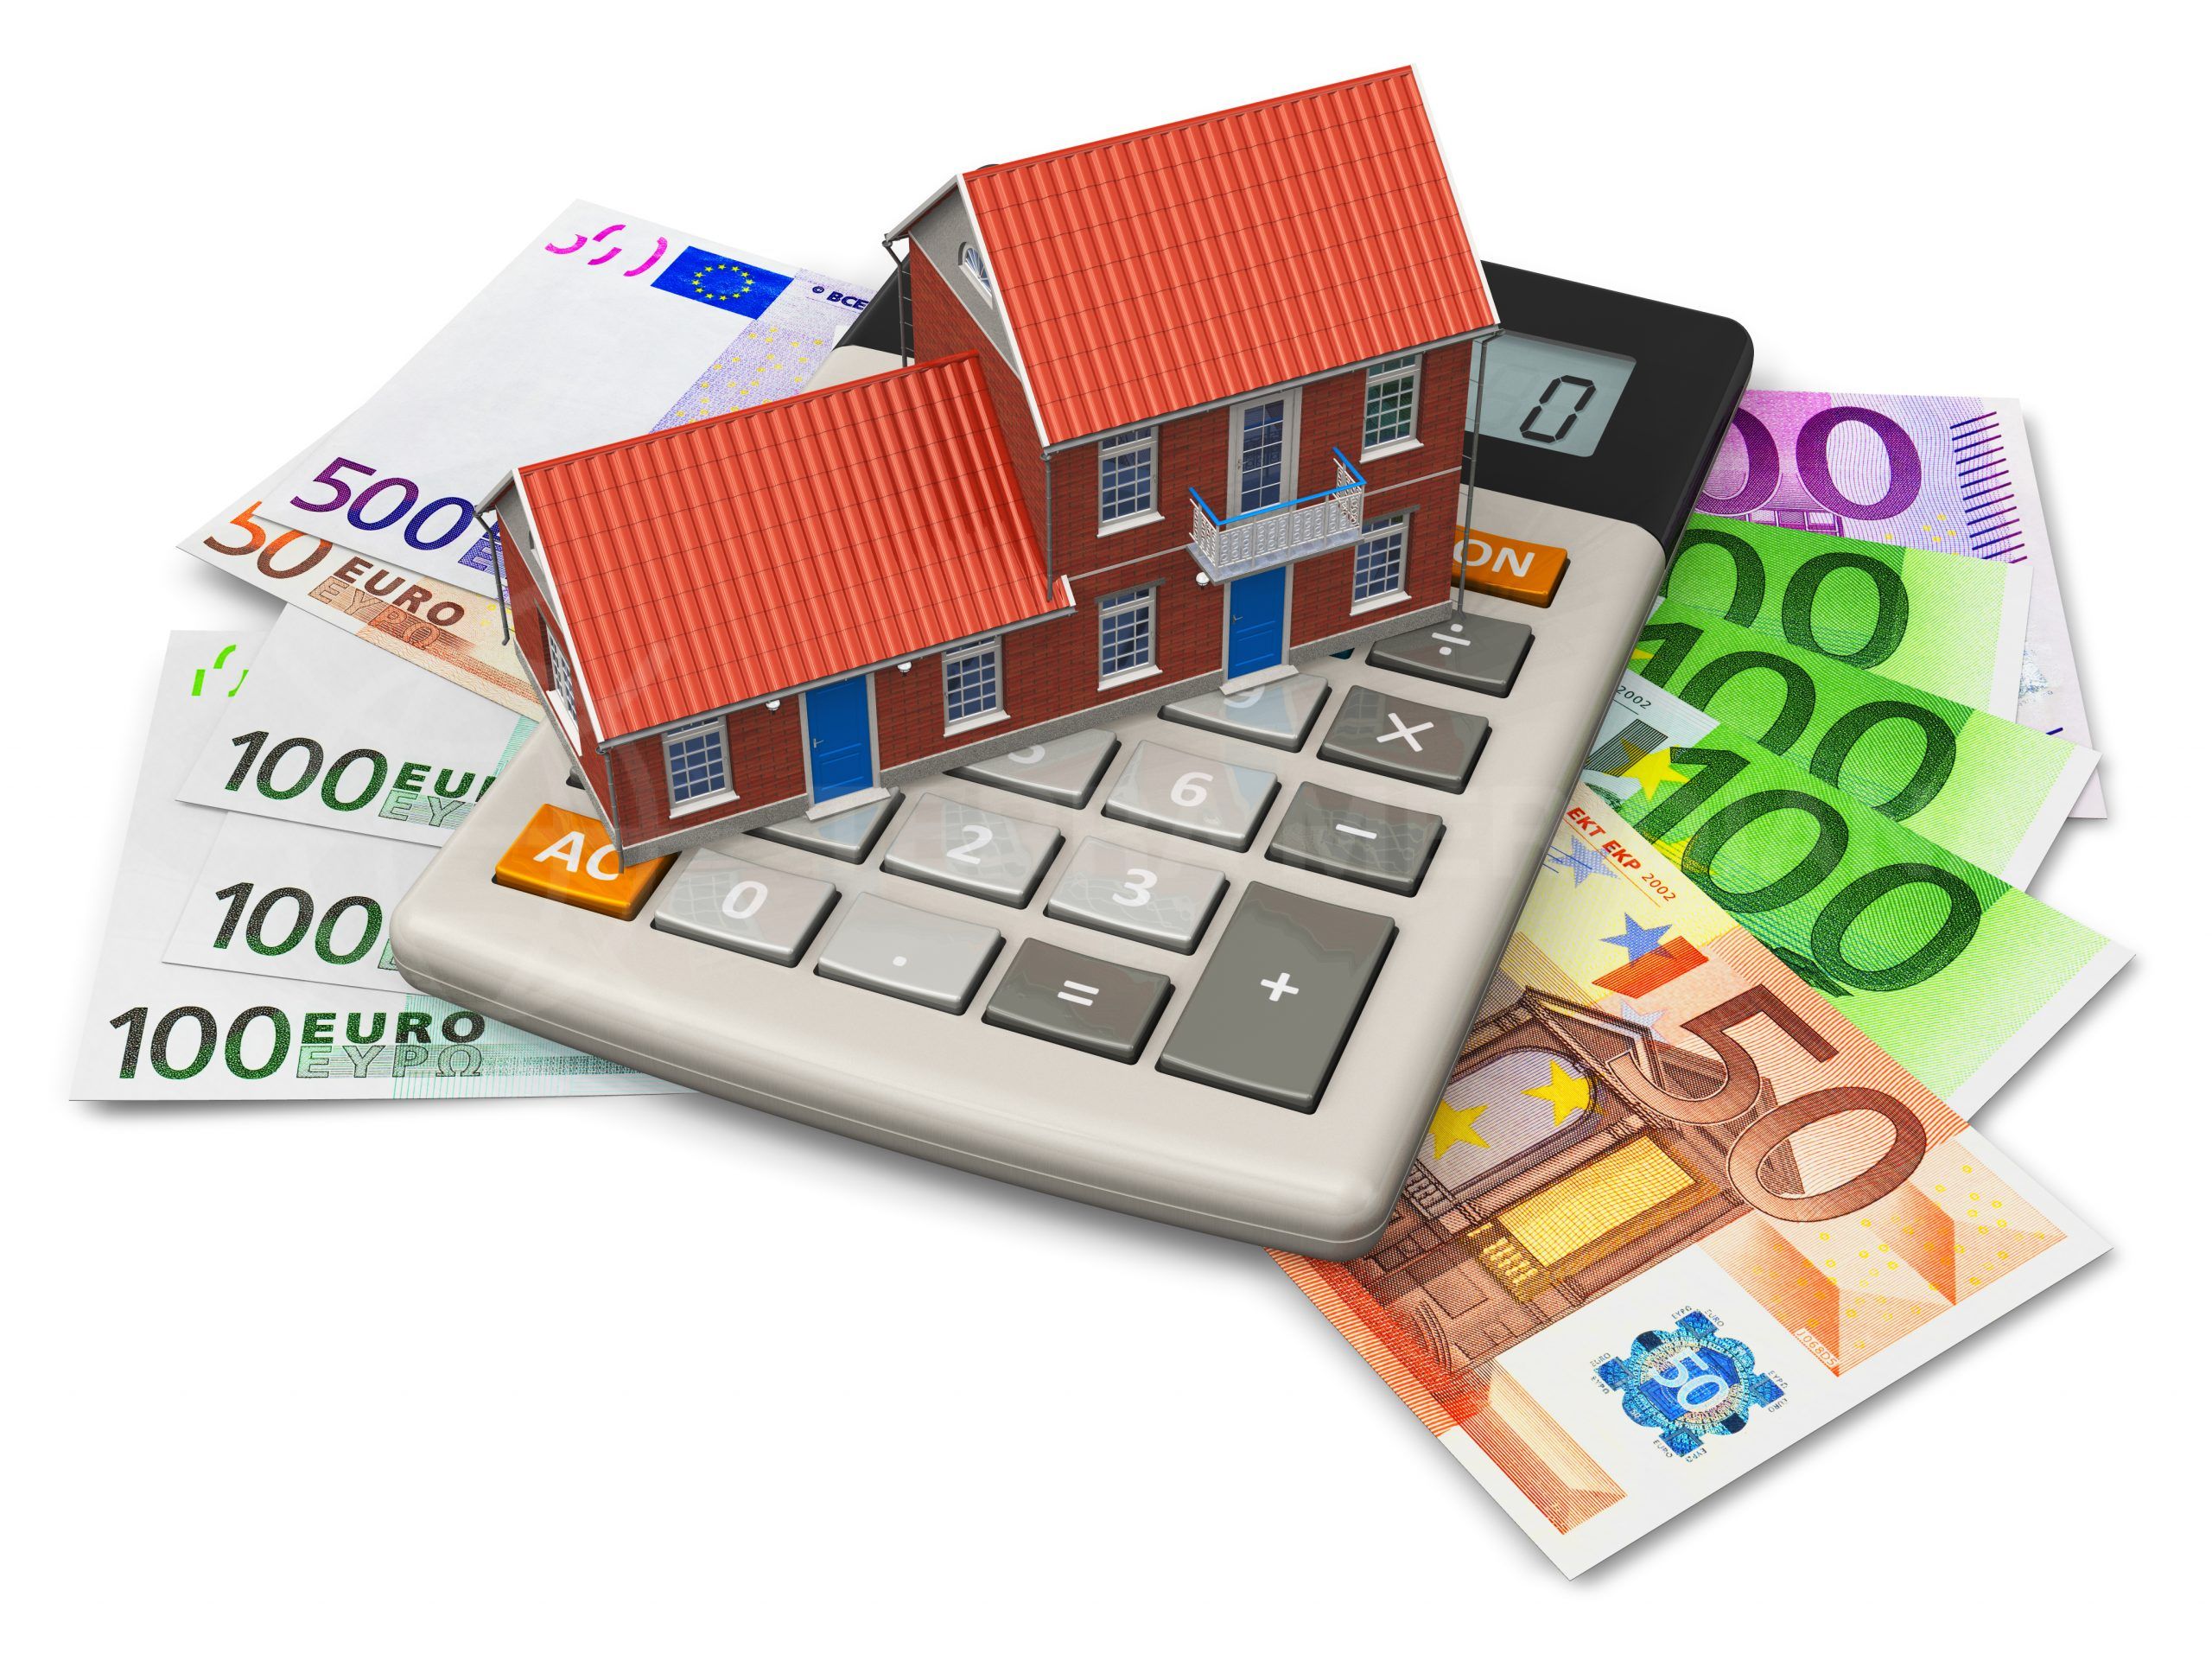 Municipal property purchase taxes in Spain